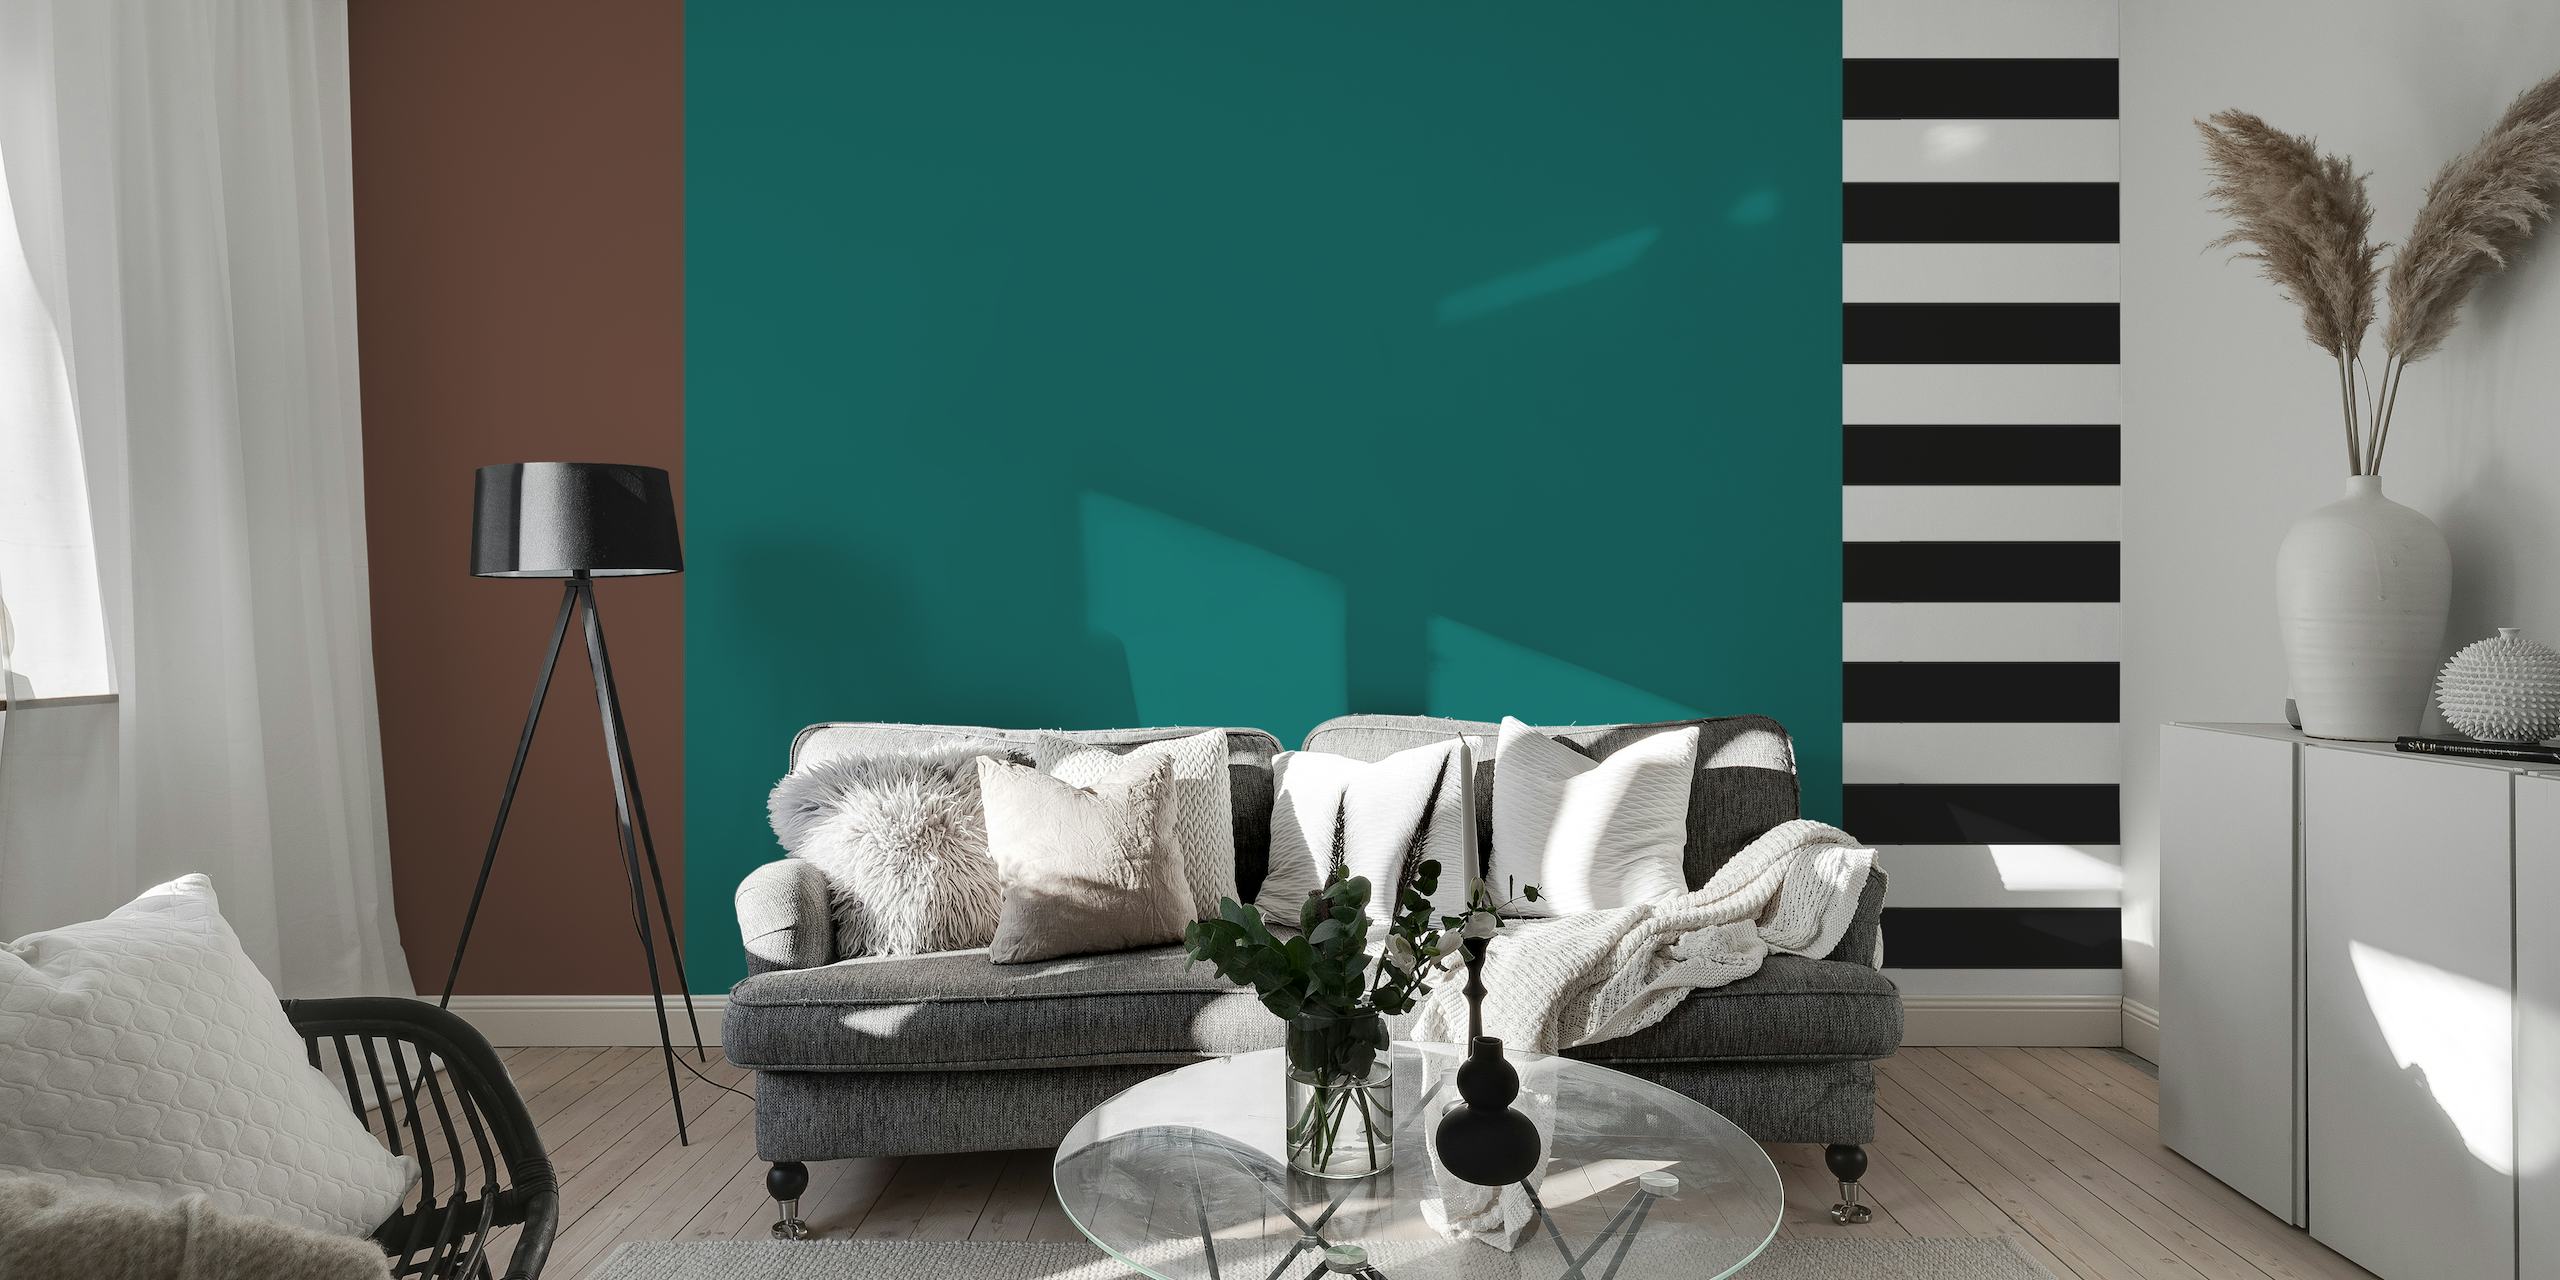 Abstract geometric wall mural from Shape Collection No 4 featuring teal, black, white, and brown elements